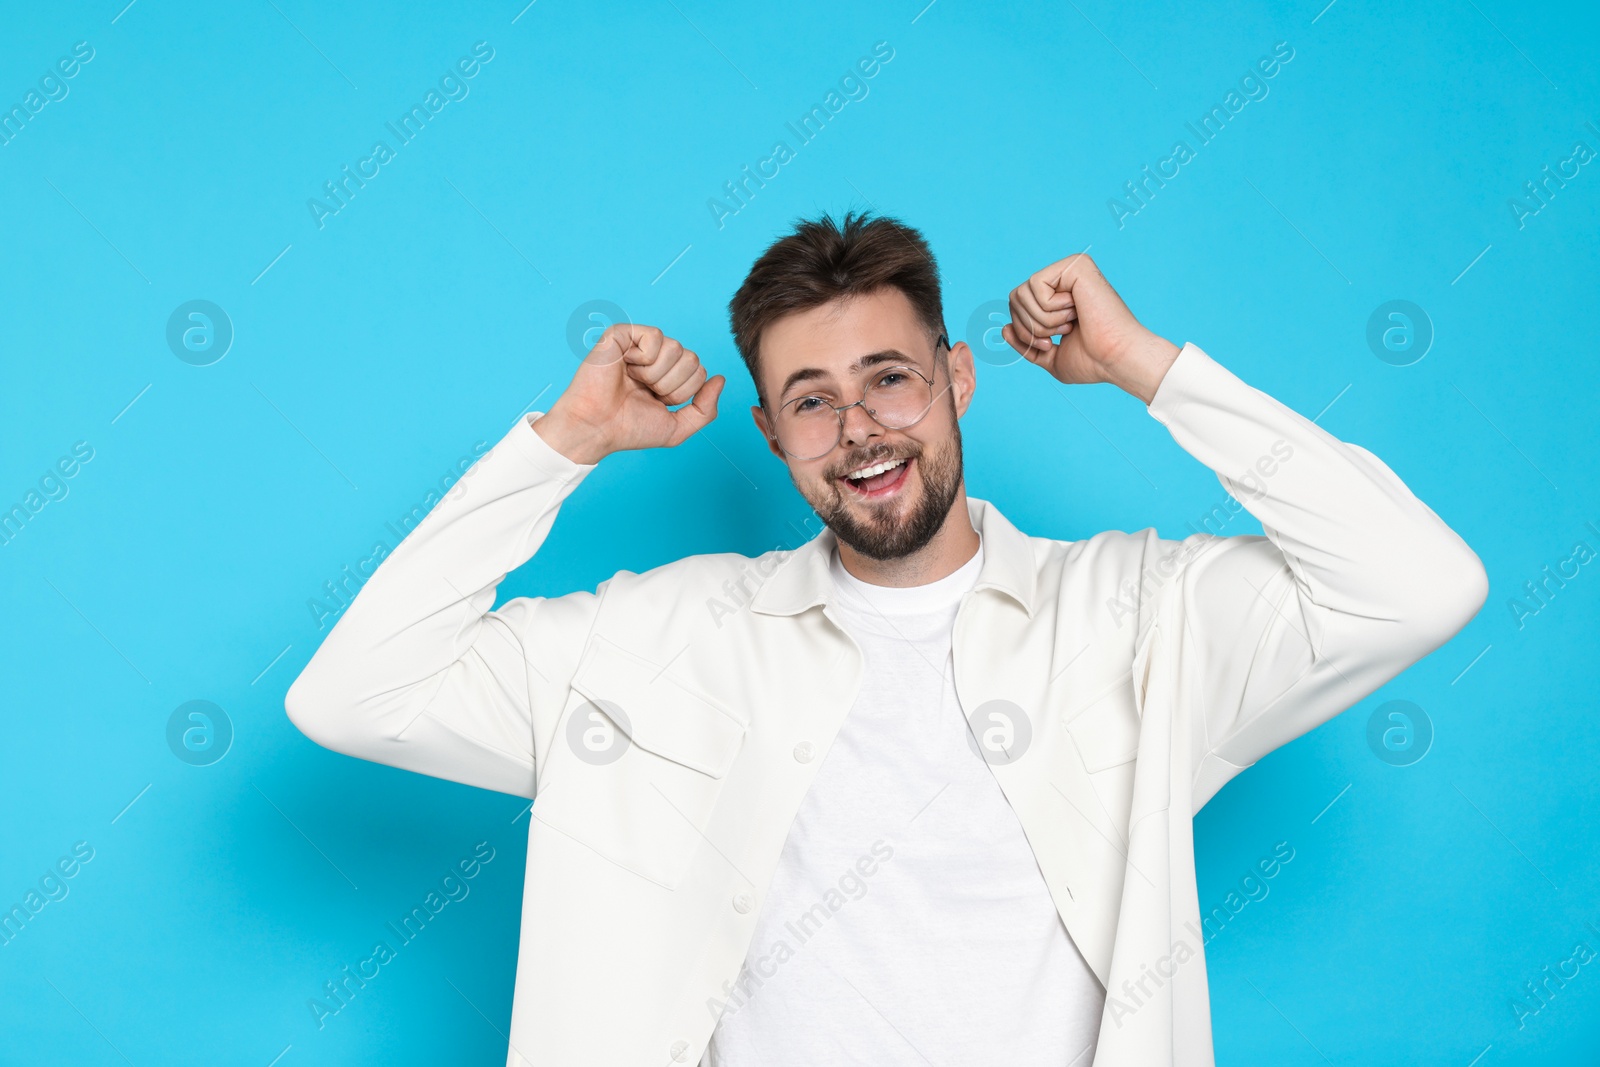 Photo of Excited man in white jacket celebrating victory on light blue background